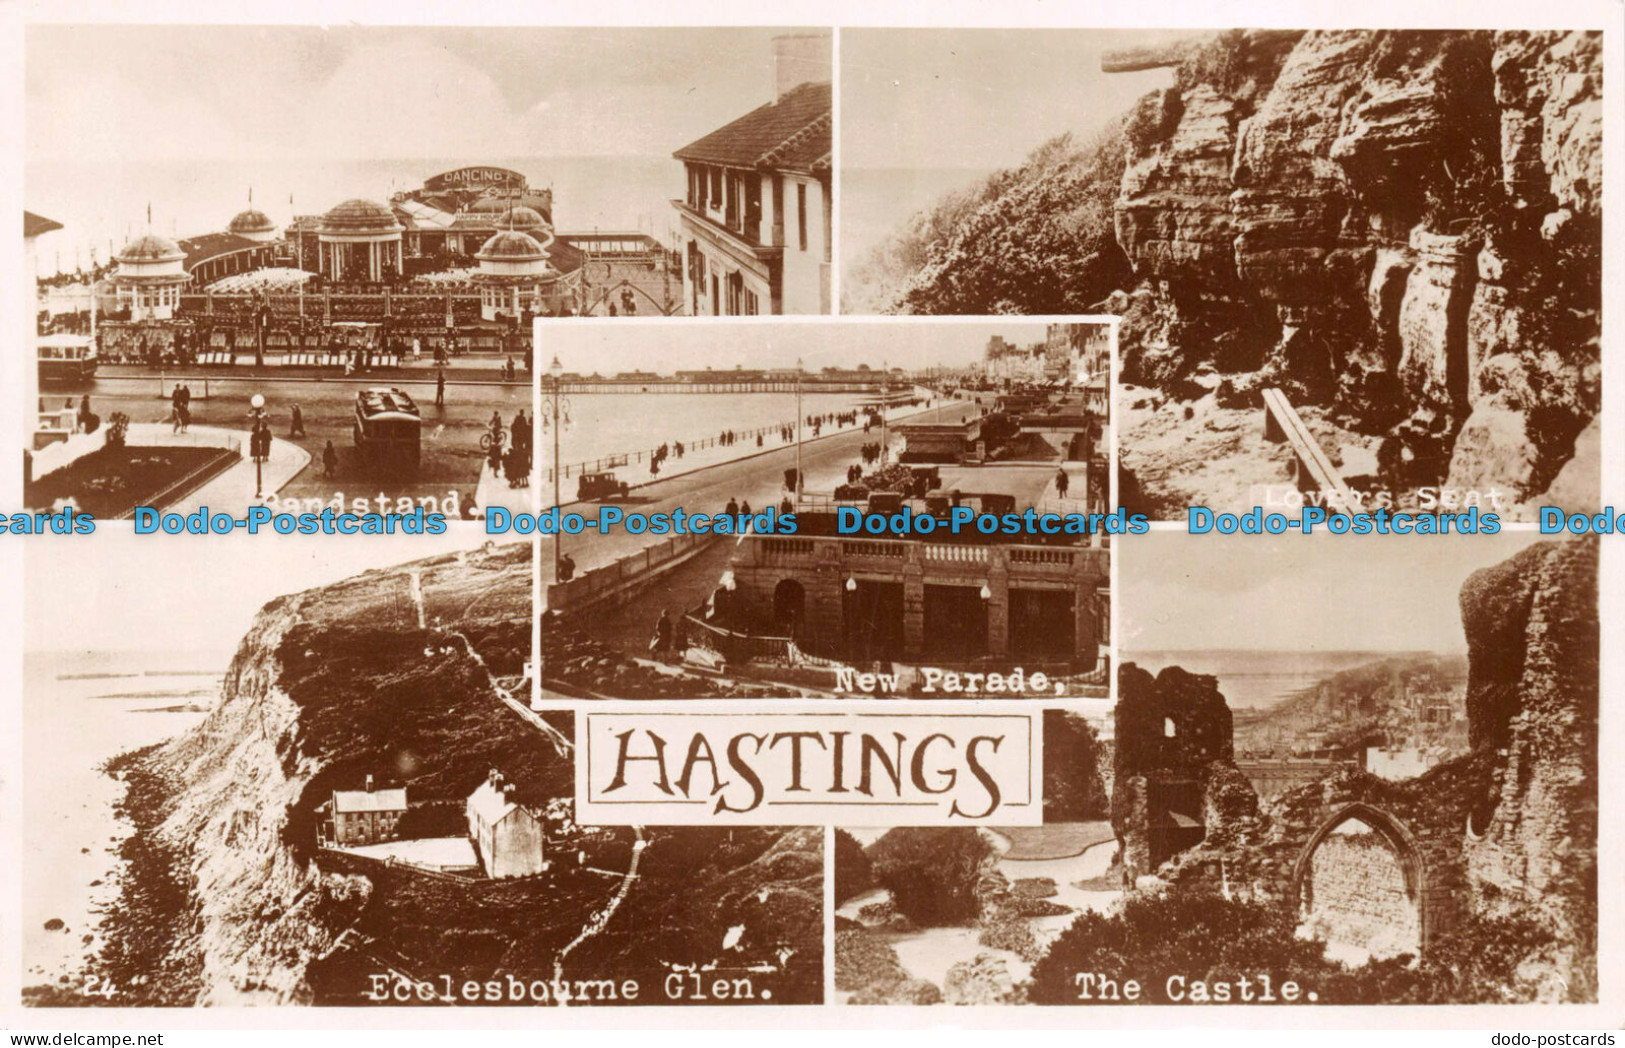 R058166 Hastings. Norman. RP. Multi View - World